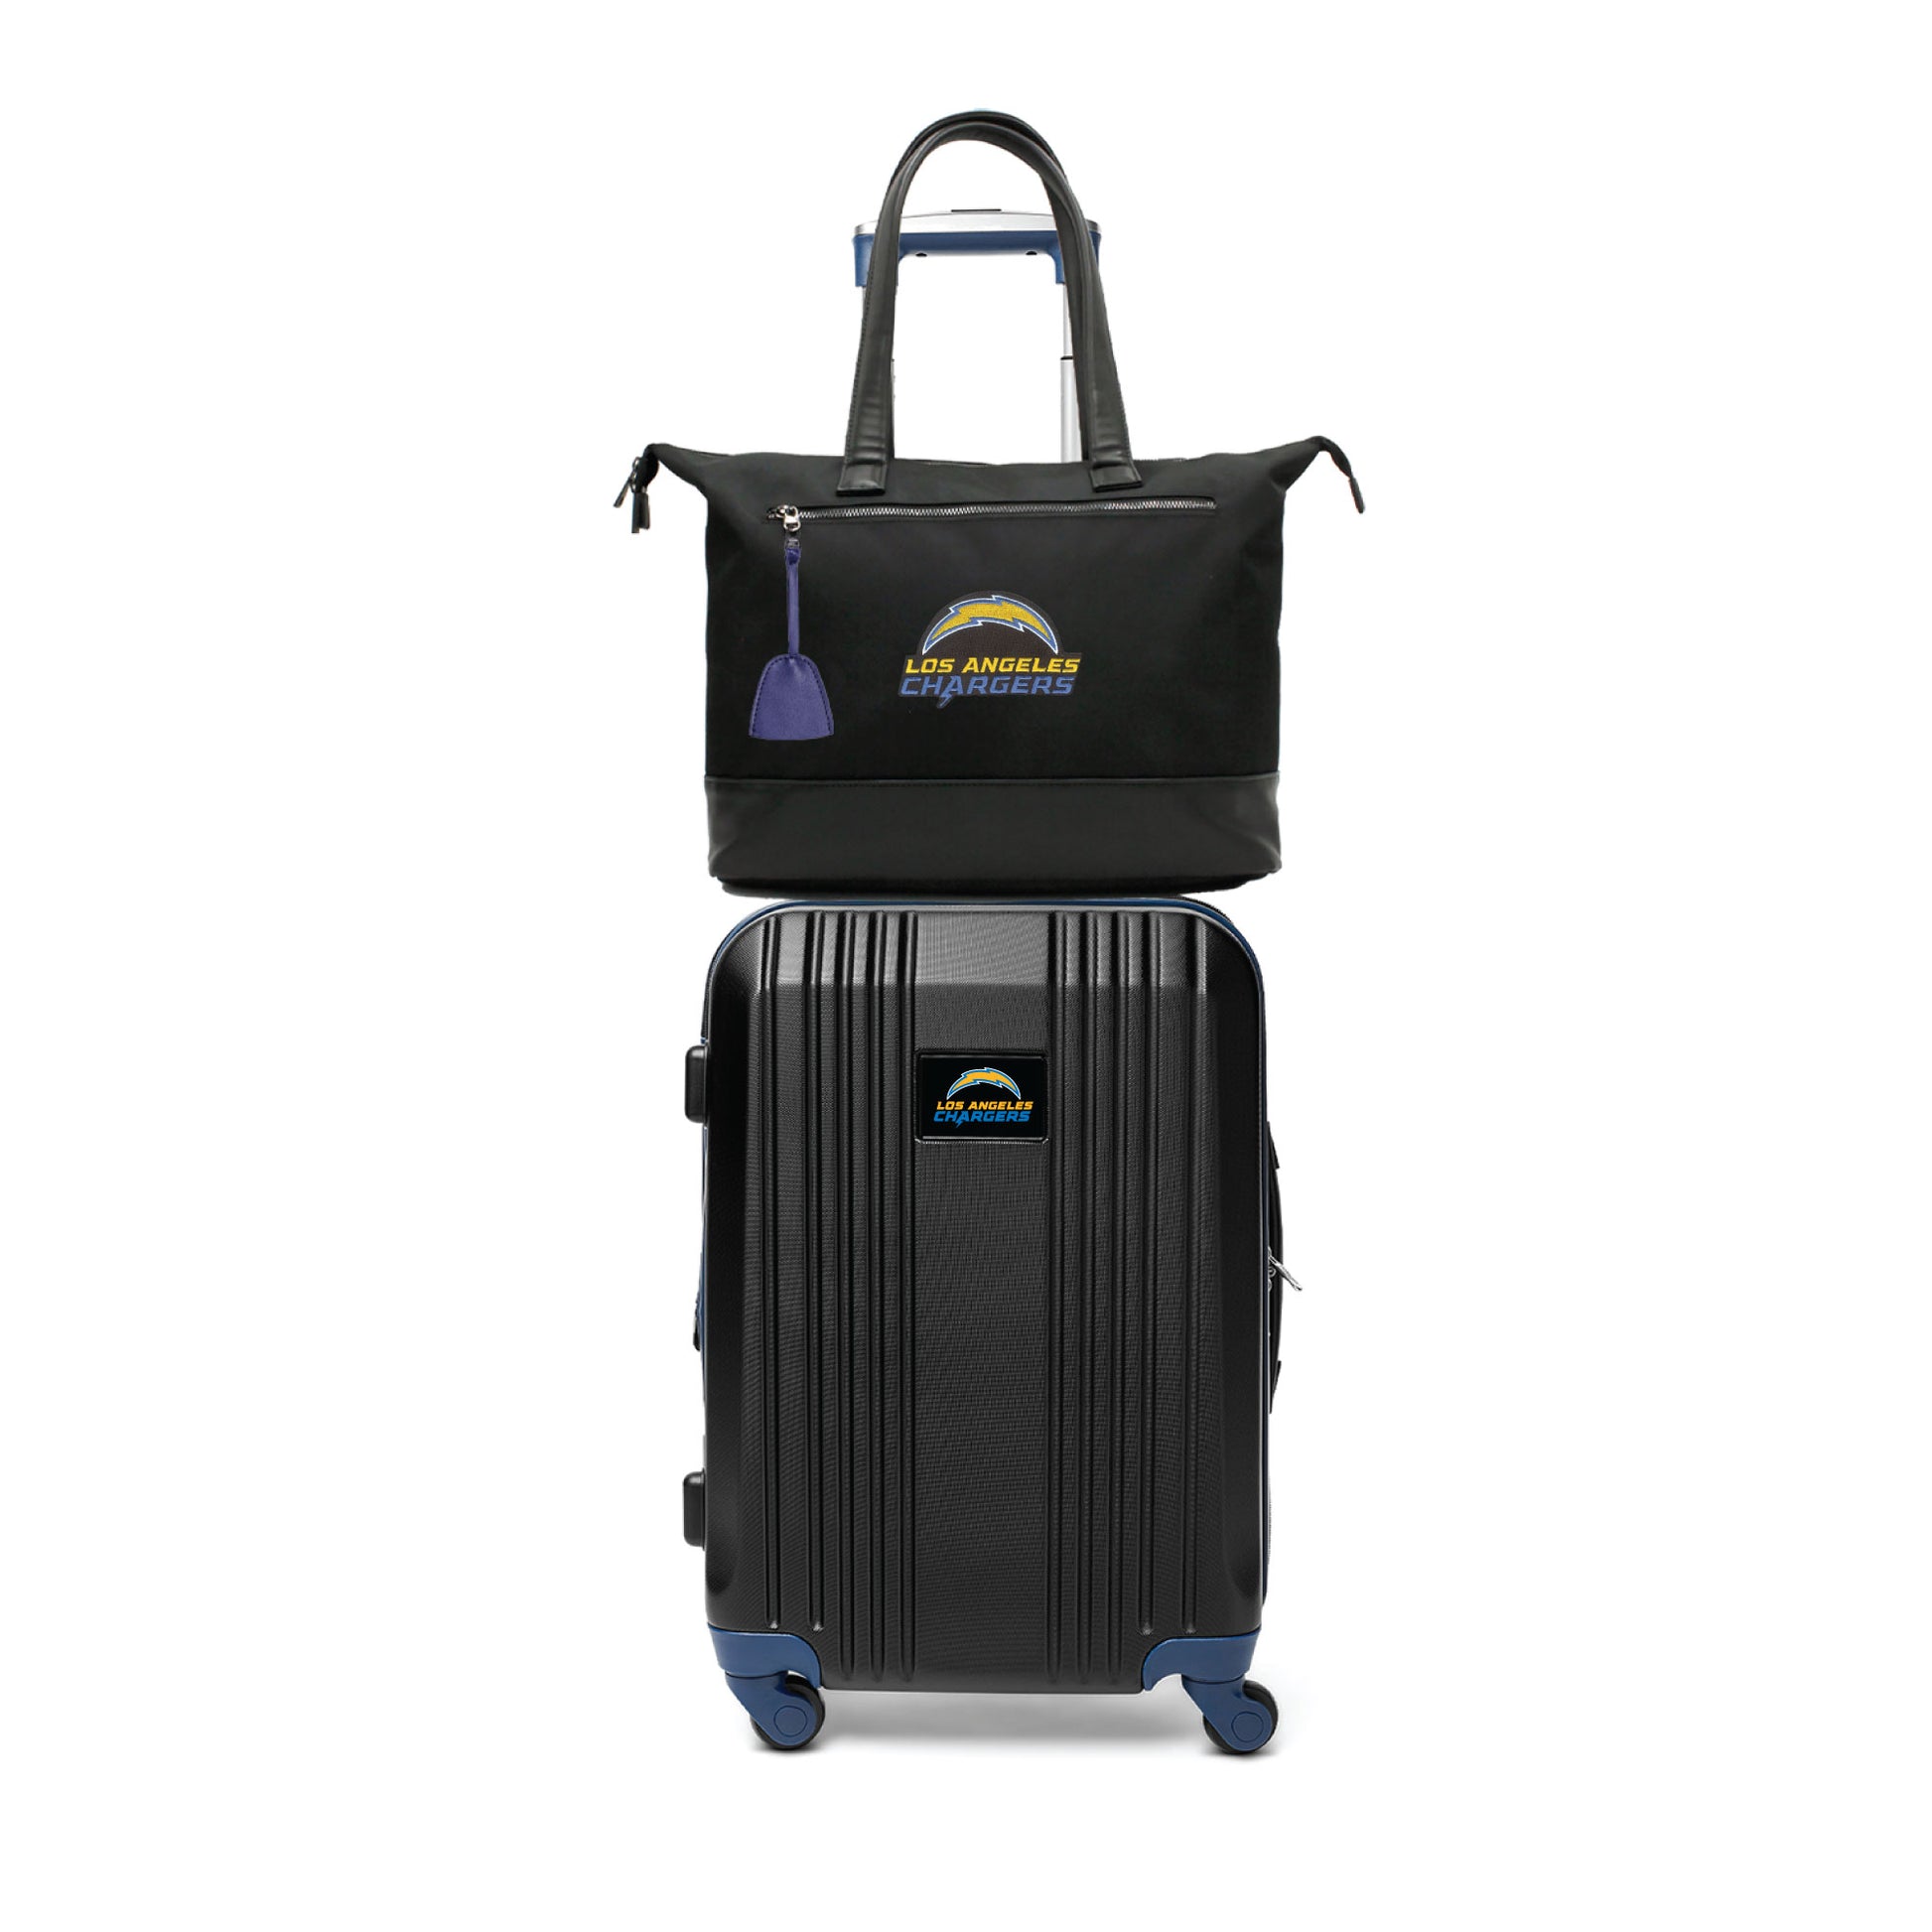 Los Angeles Chargers Premium Laptop Tote Bag and Luggage Set